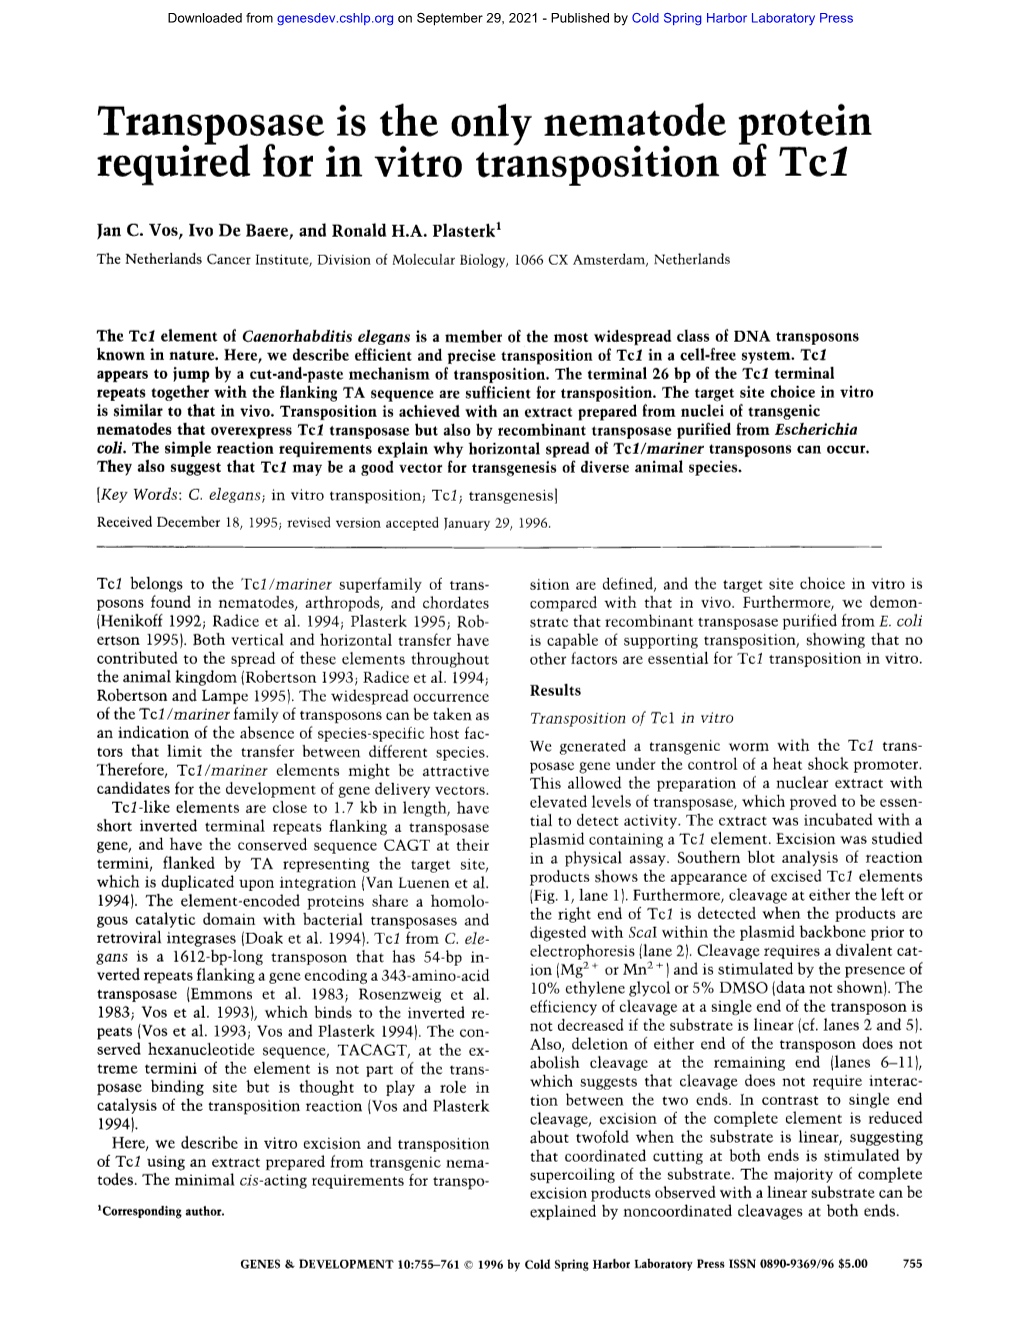 Transposase.Is the Only Nematode Protein Required for in Vitro Transposition of Tcl